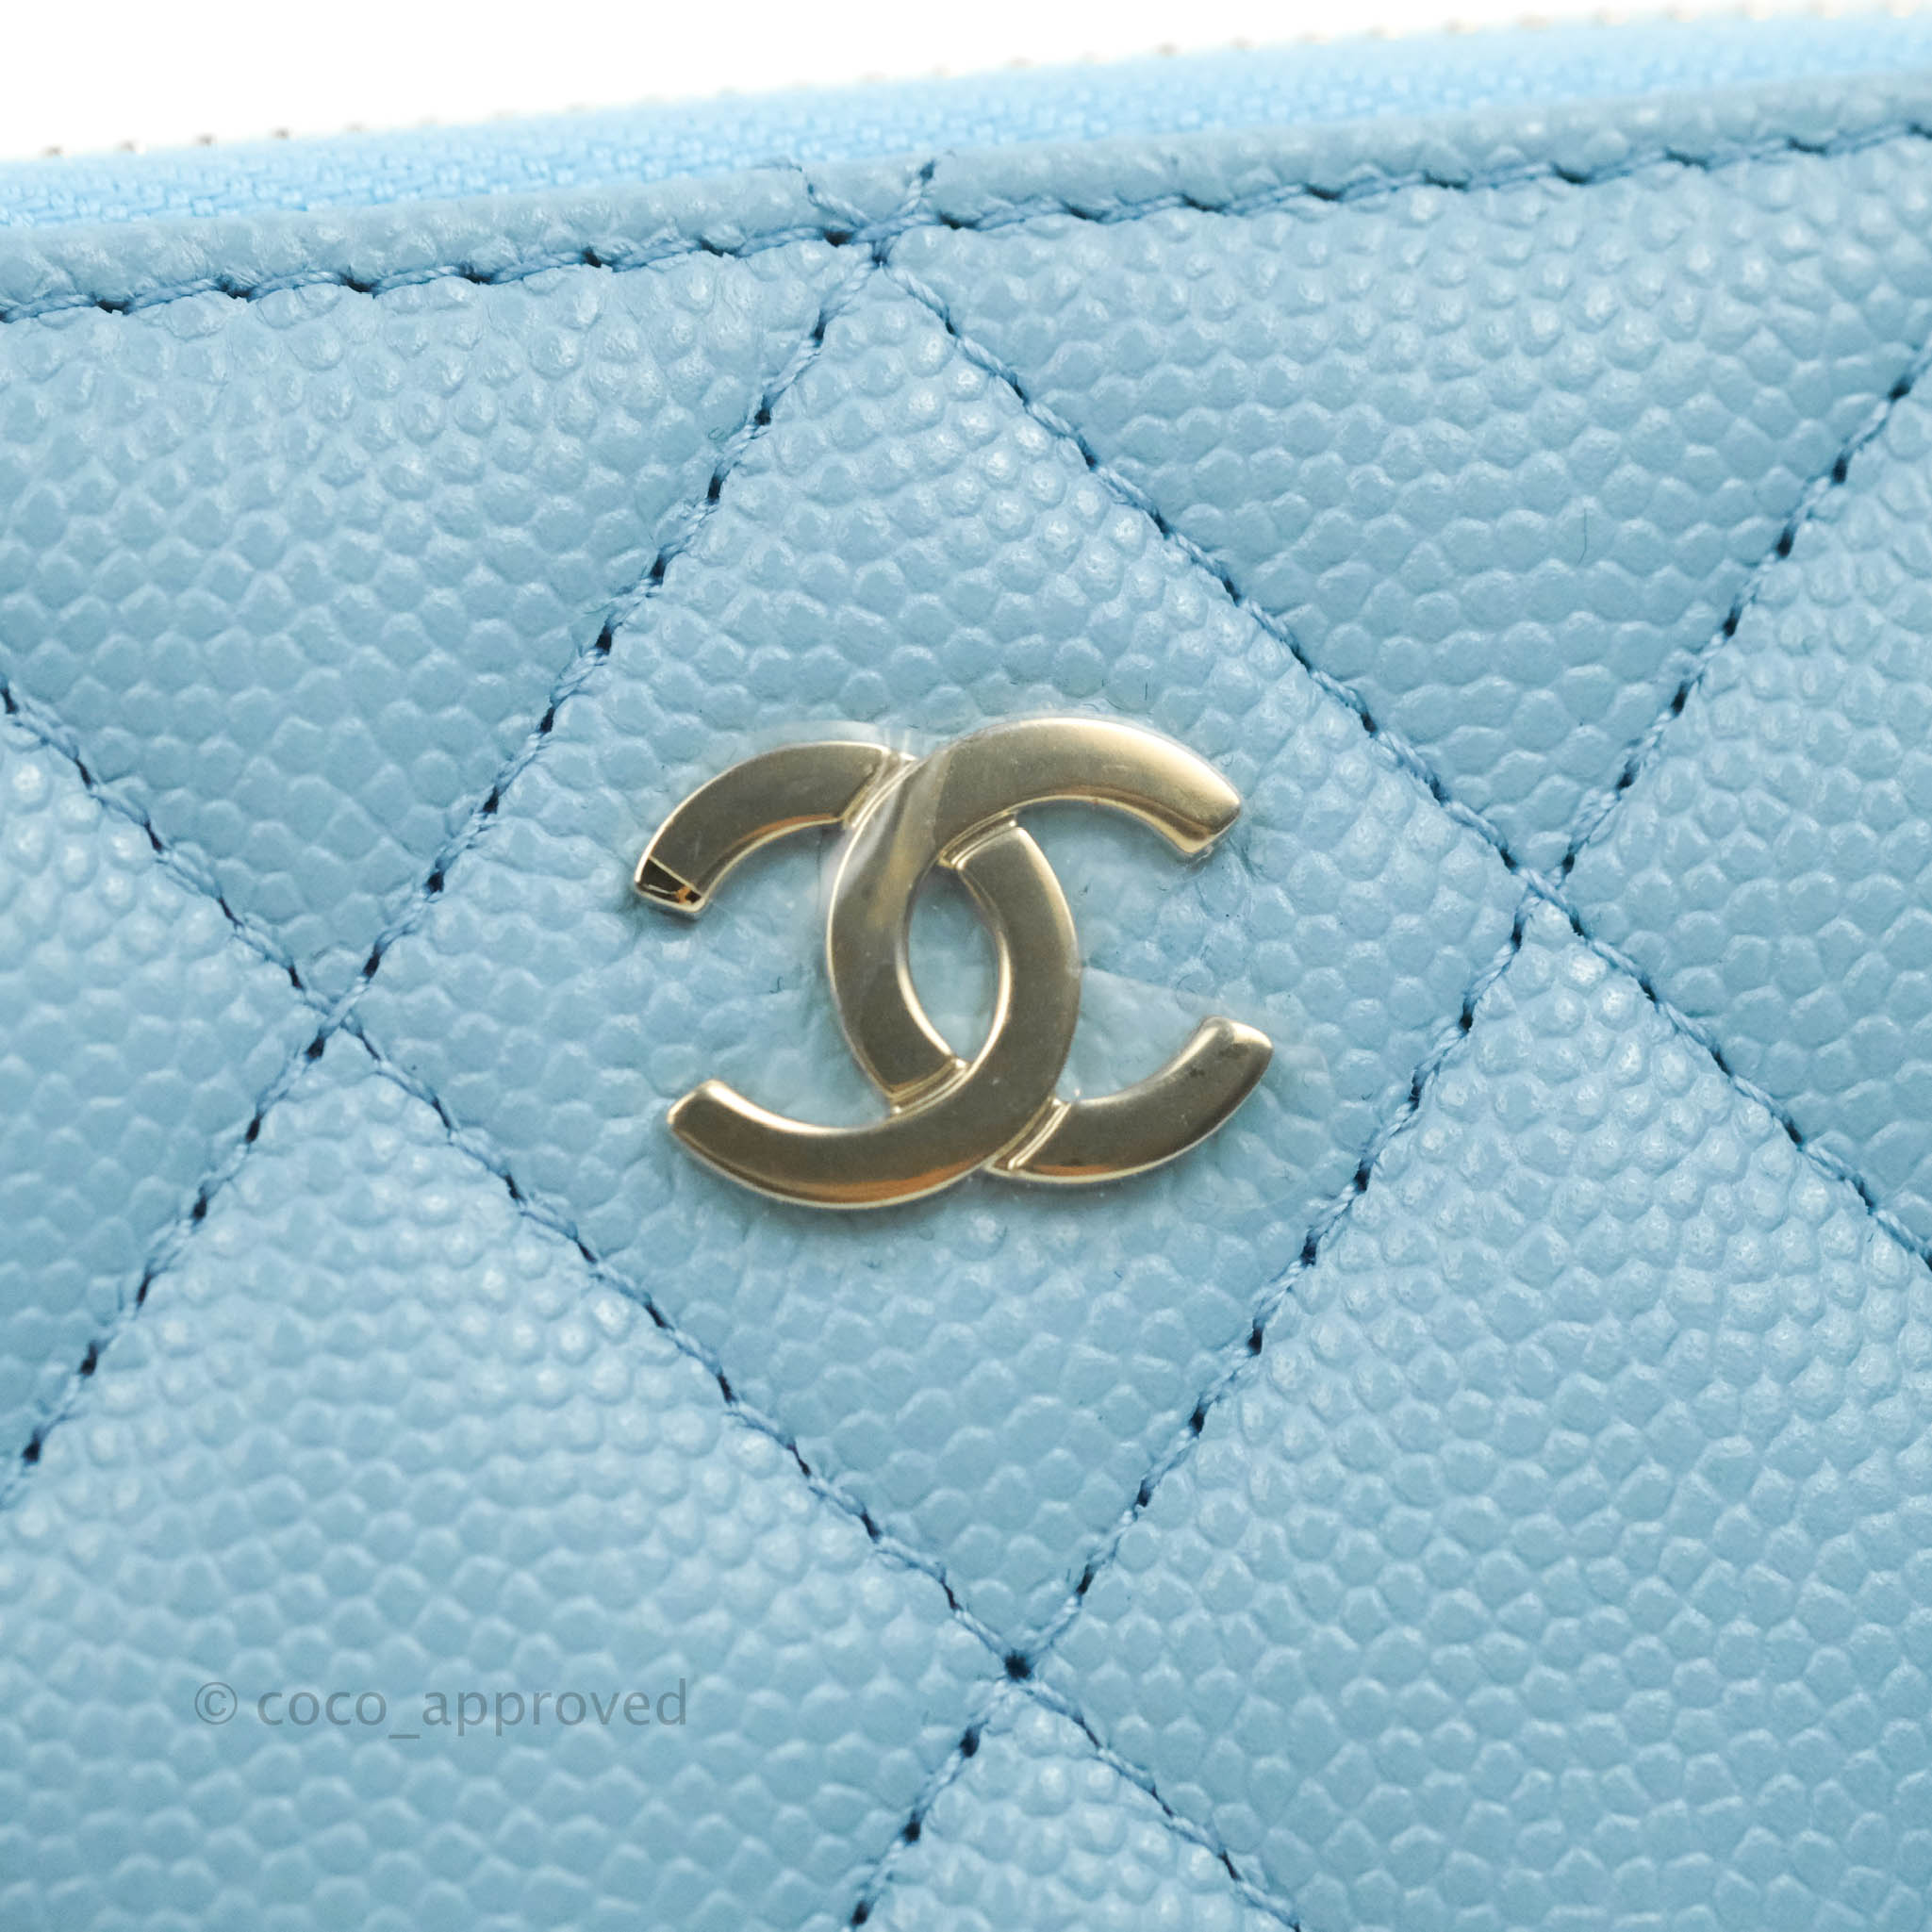 Chanel Classic Zipped Coin Purse Light Blue Caviar Gold Hardware – Coco  Approved Studio